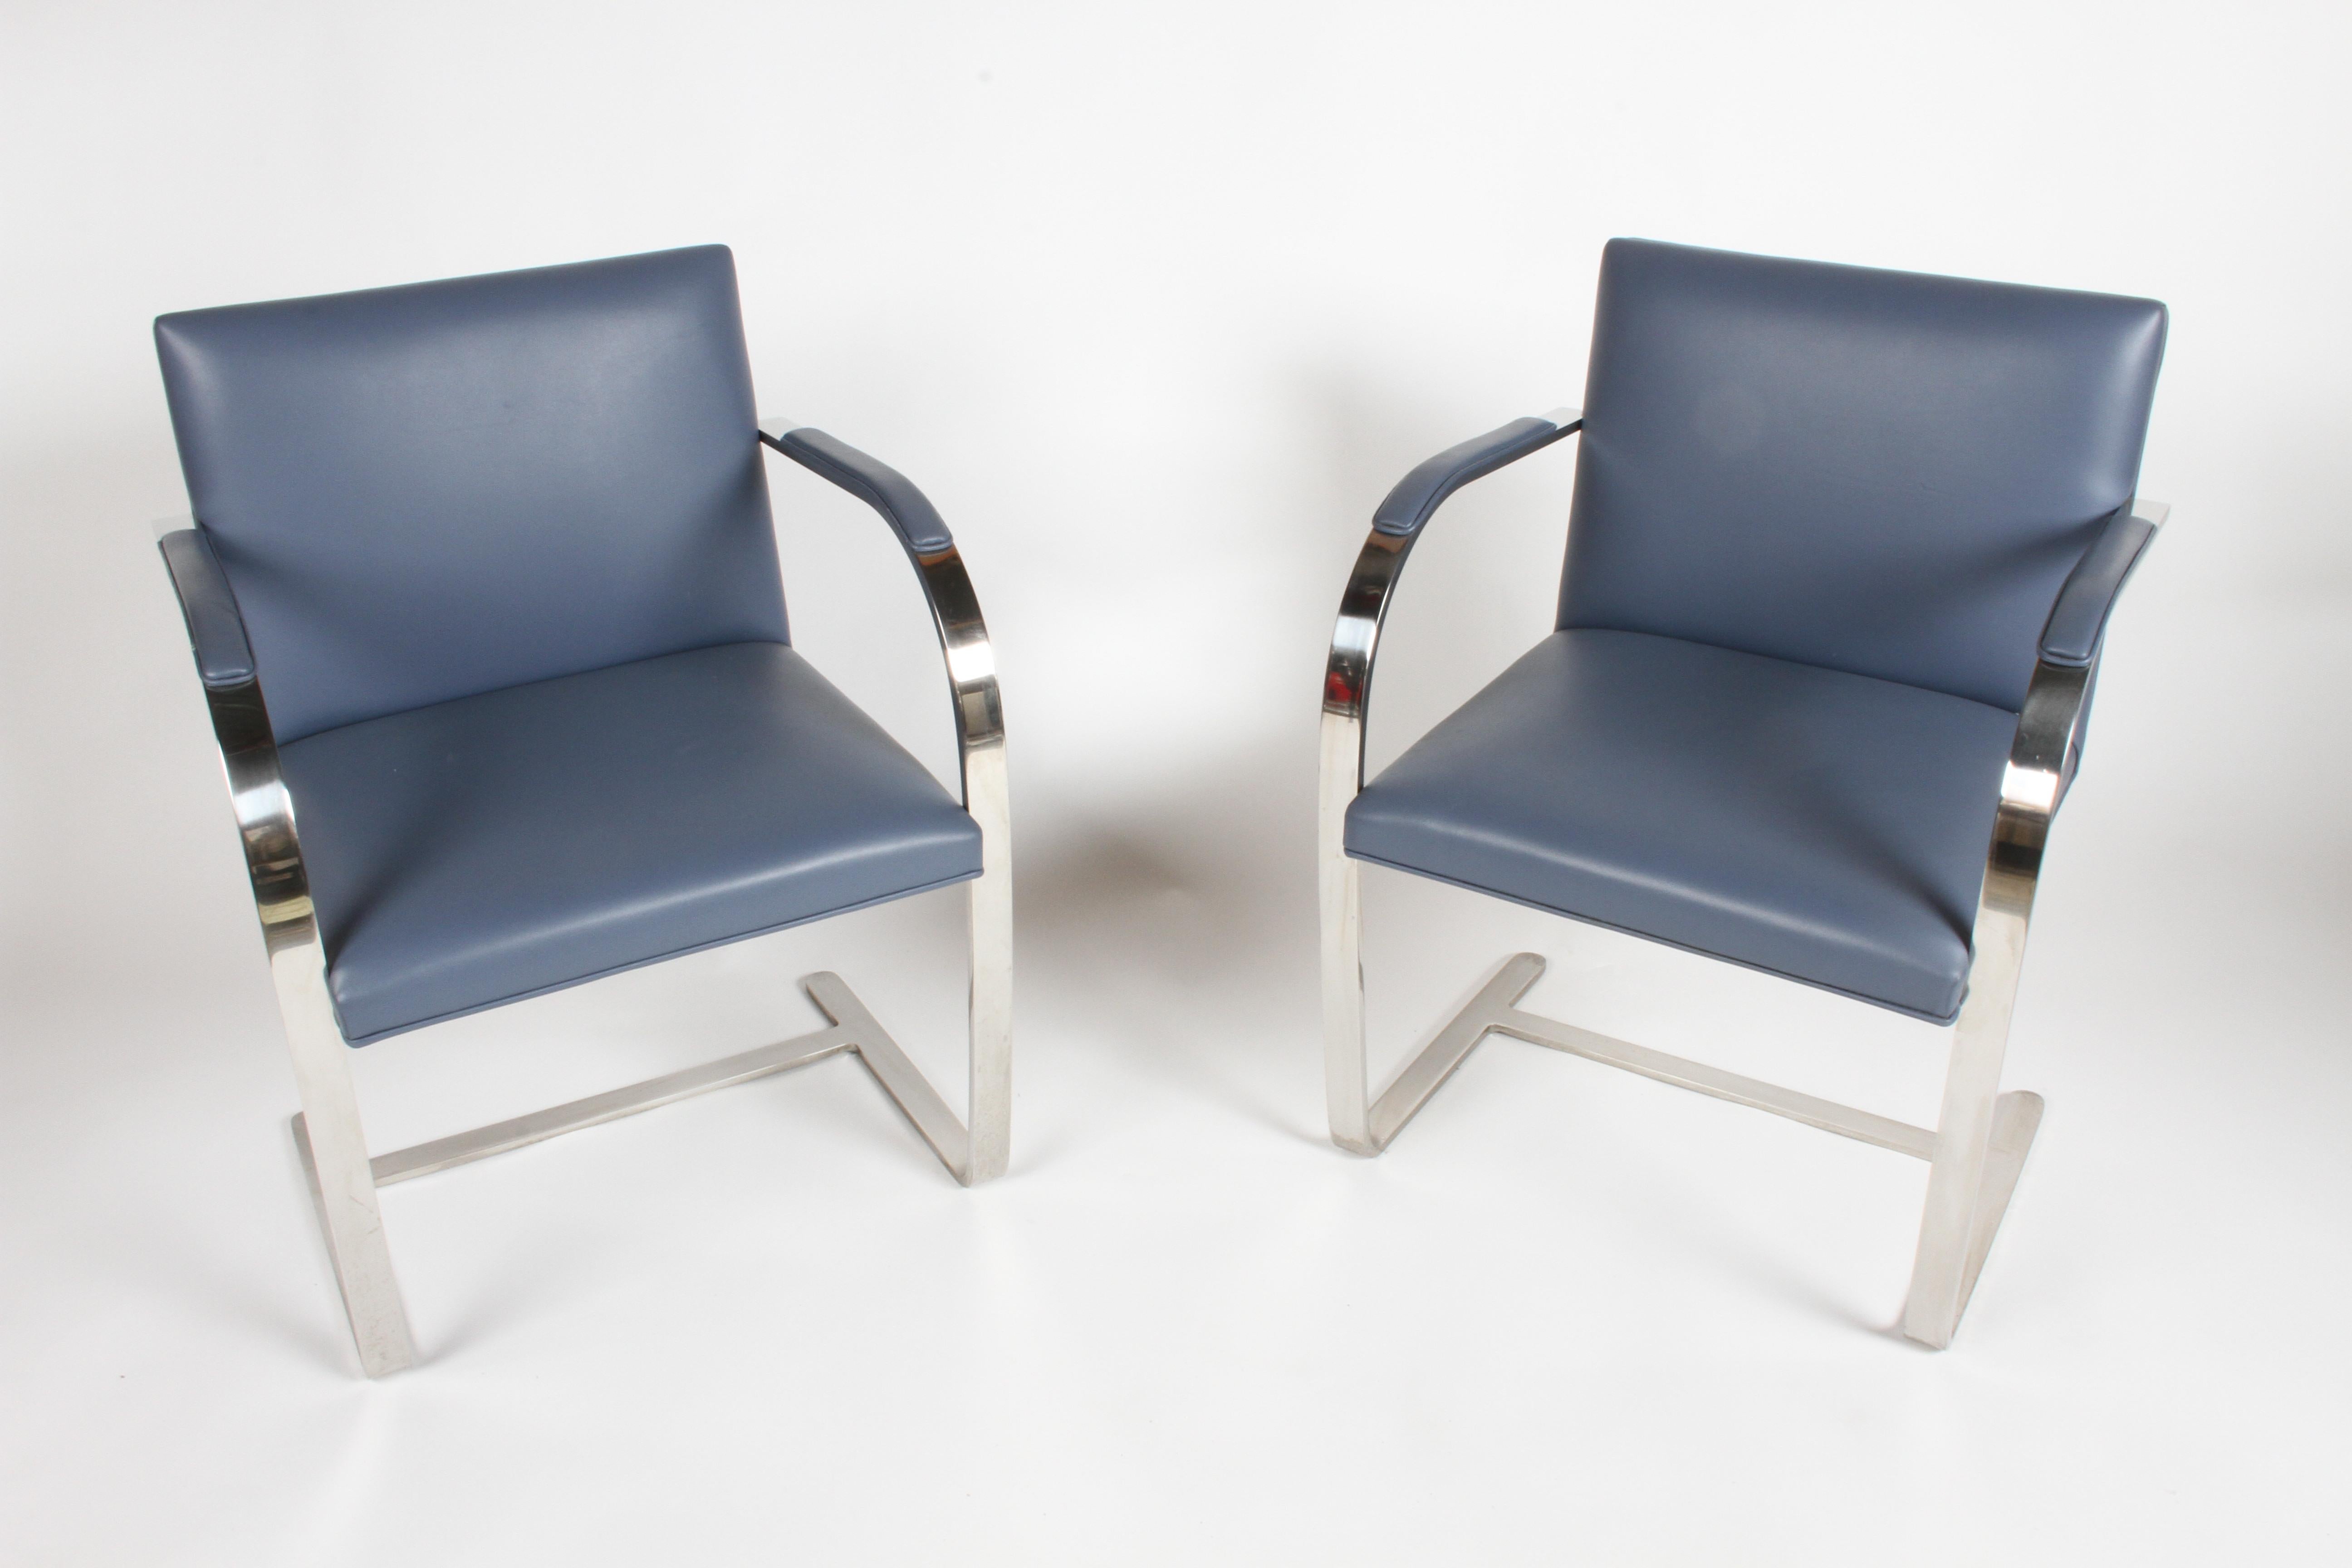 20th Century Pair of Mies van der Rohe Flatbar Brno Chairs by Knoll, Stainless